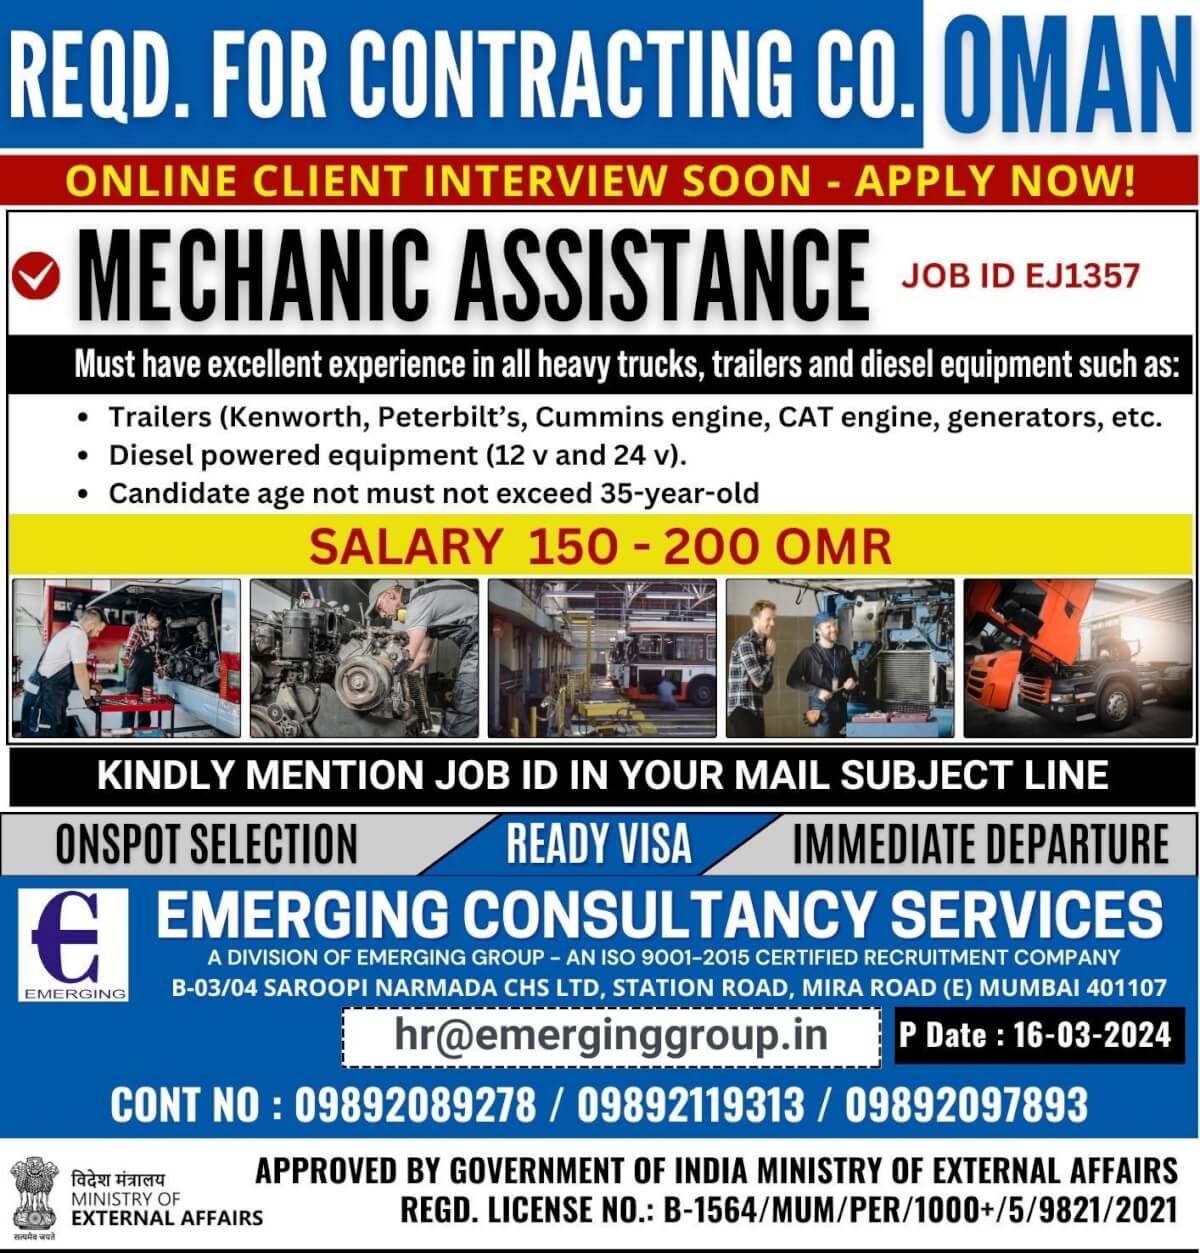 REQUIRED FOR CONTRACTING COMPANY IN OMAN -ONLINE CLIENT INTERVIEW SOON - APPLY NOW!